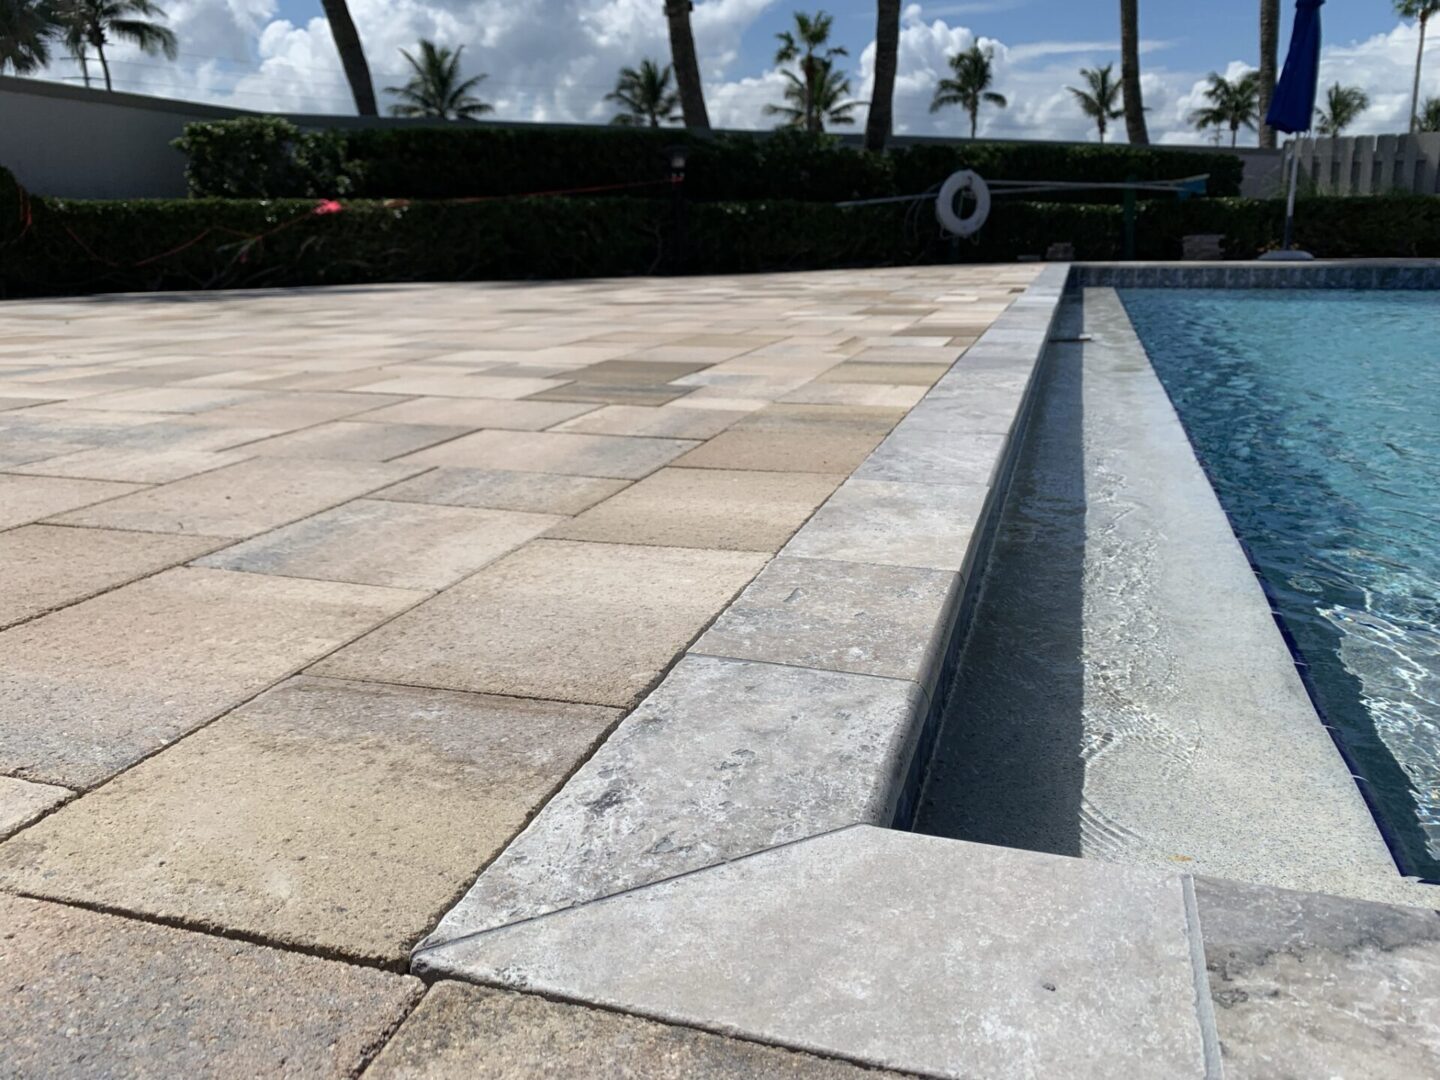 Close-up of a poolside area with paved stone tiles next to the edge of a swimming pool, surrounded by greenery, palm trees, and a cloudy sky in the background.